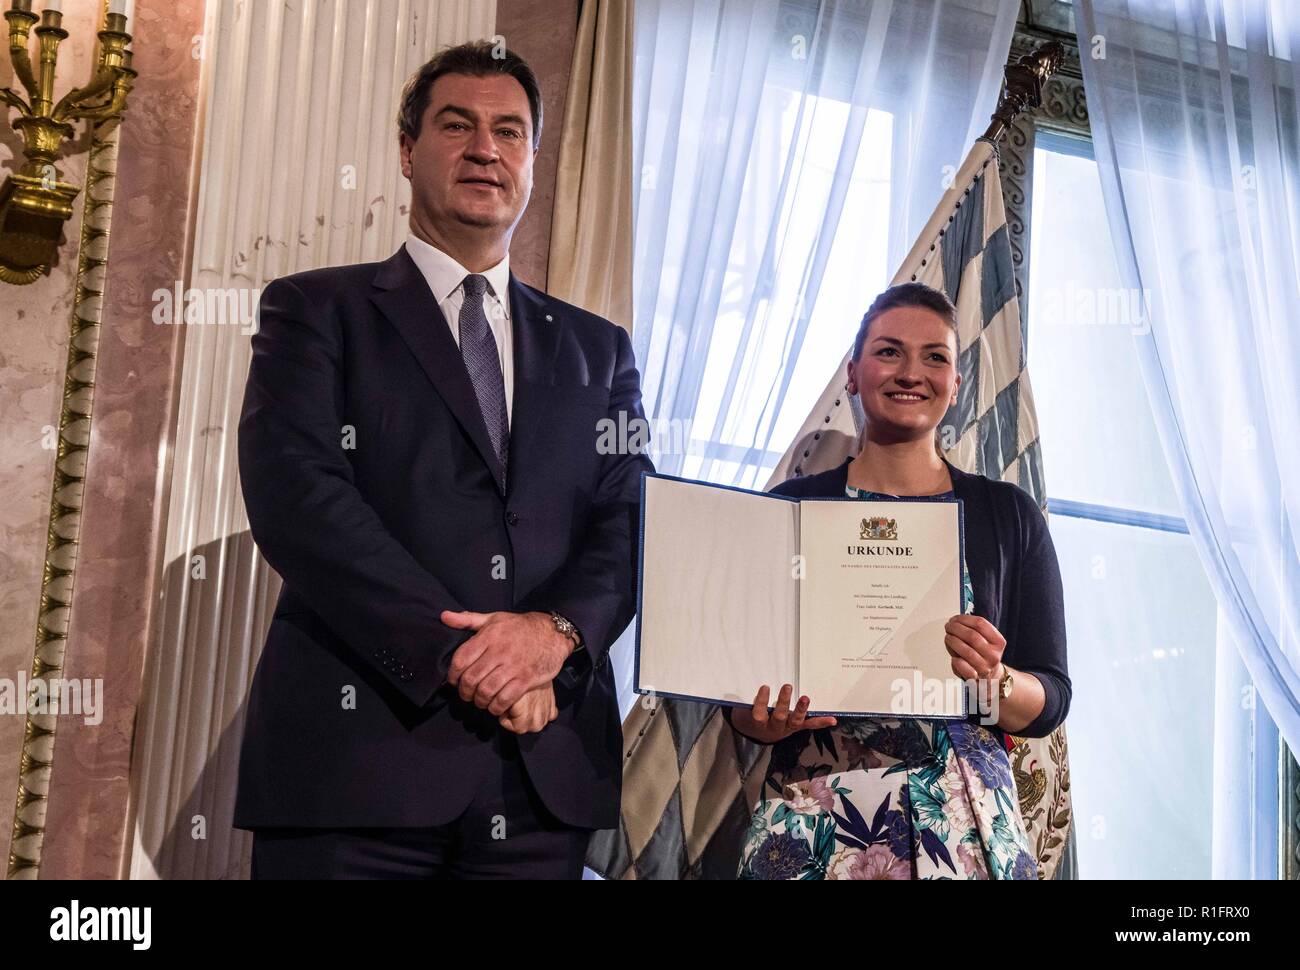 November 12, 2018 - Munich, Bavaria, Germany - Judith Gerlach, MdL Staatsminister fÃ¼r Digitales, Medien und Europa. Minister President of Bavaria MARKUS SOEDER presented the new members of his cabinet at Prinz Carl Palais.  Dr. Soeder was confirmed as Minister President on Nov. 6th and is the successor to Horst Seehofer. (Credit Image: © Sachelle Babbar/ZUMA Wire) Stock Photo